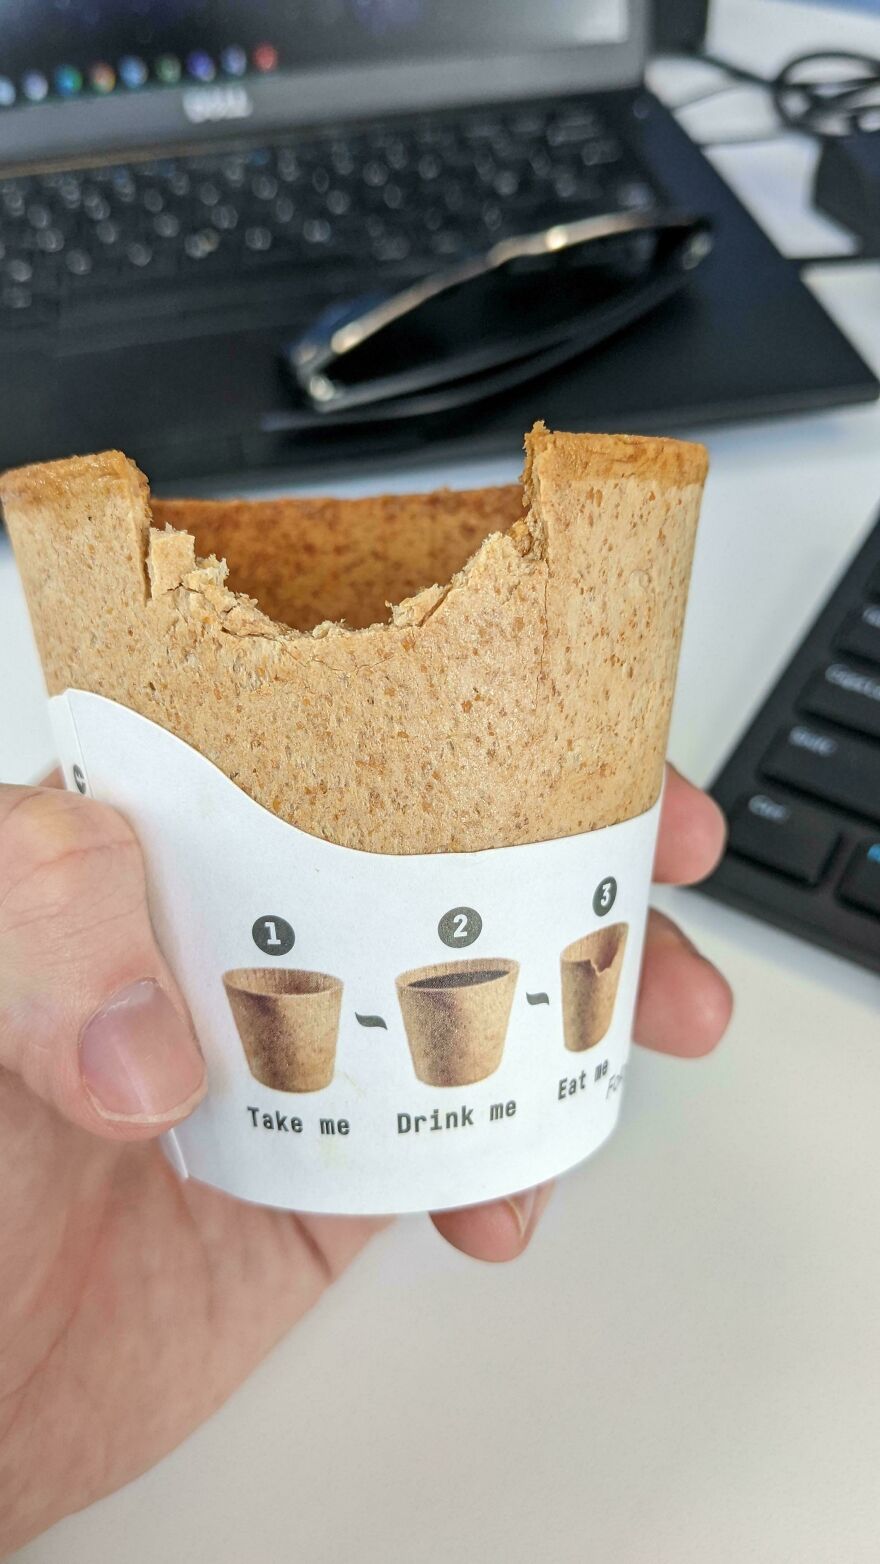 My Coffee Cup Is Edible